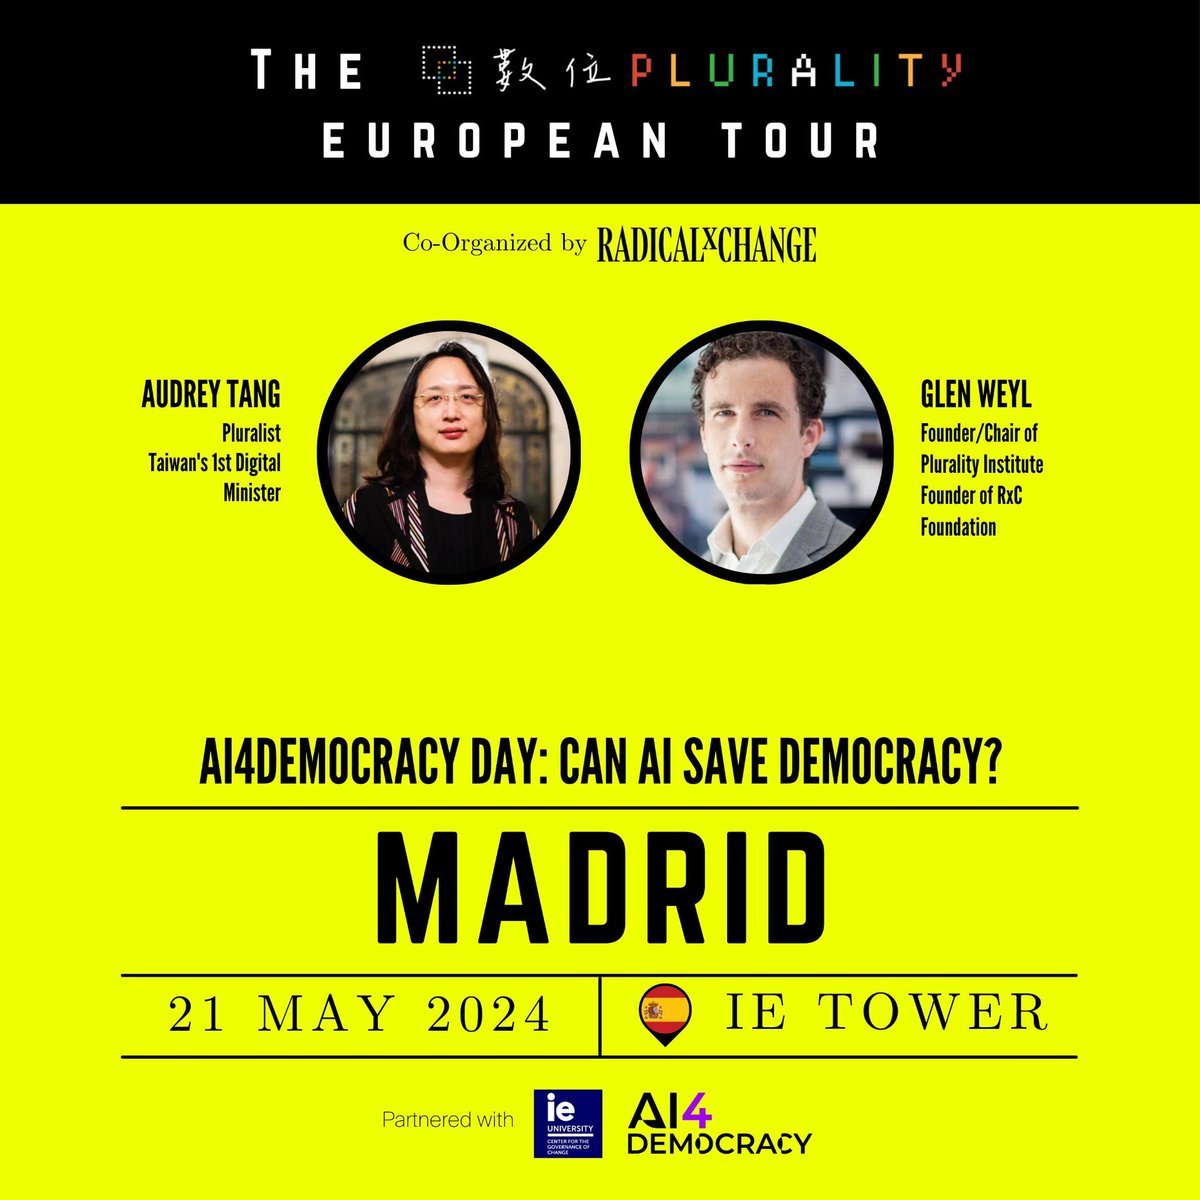 First stop on the @pluralitybook Europe Tour: Madrid on May 21. AI4Democracy Day organized by @ieGovernance @audreyt and @glenweyl among others will discuss how AI can empower citizens to shape their society and democracy eventbrite.es/e/entradas-ai4…